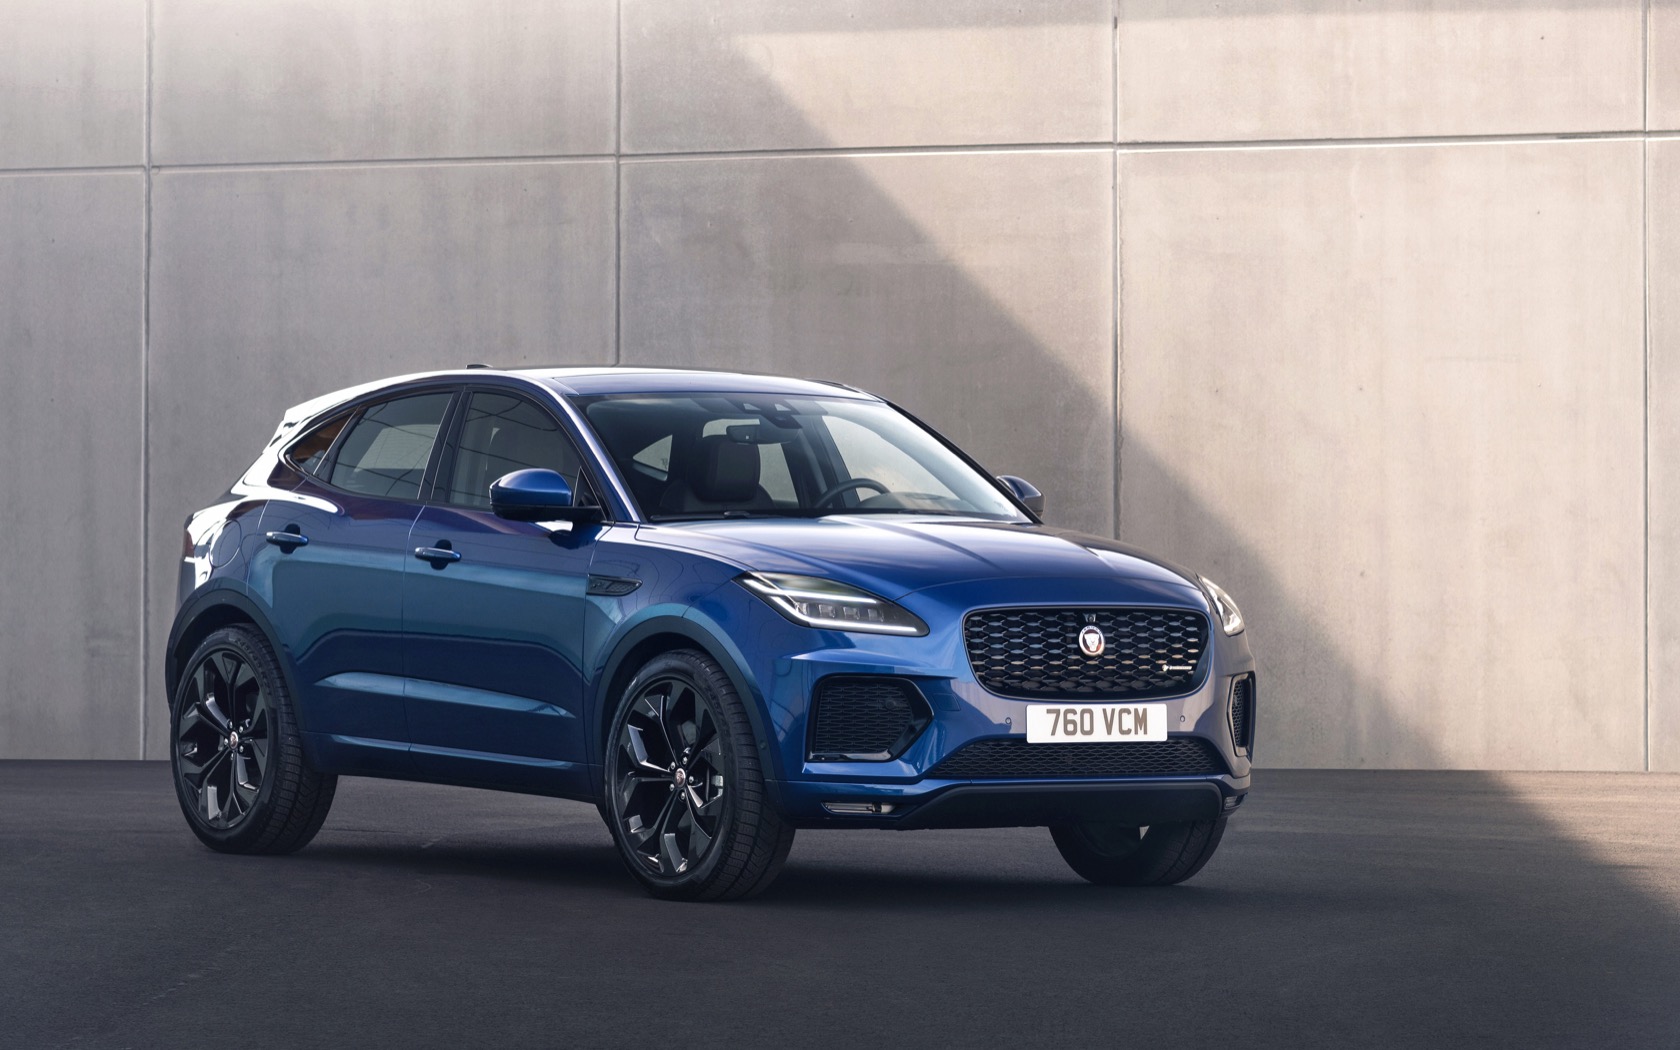 2021 jaguar e pace upgrades style and tech adds mild hybrid